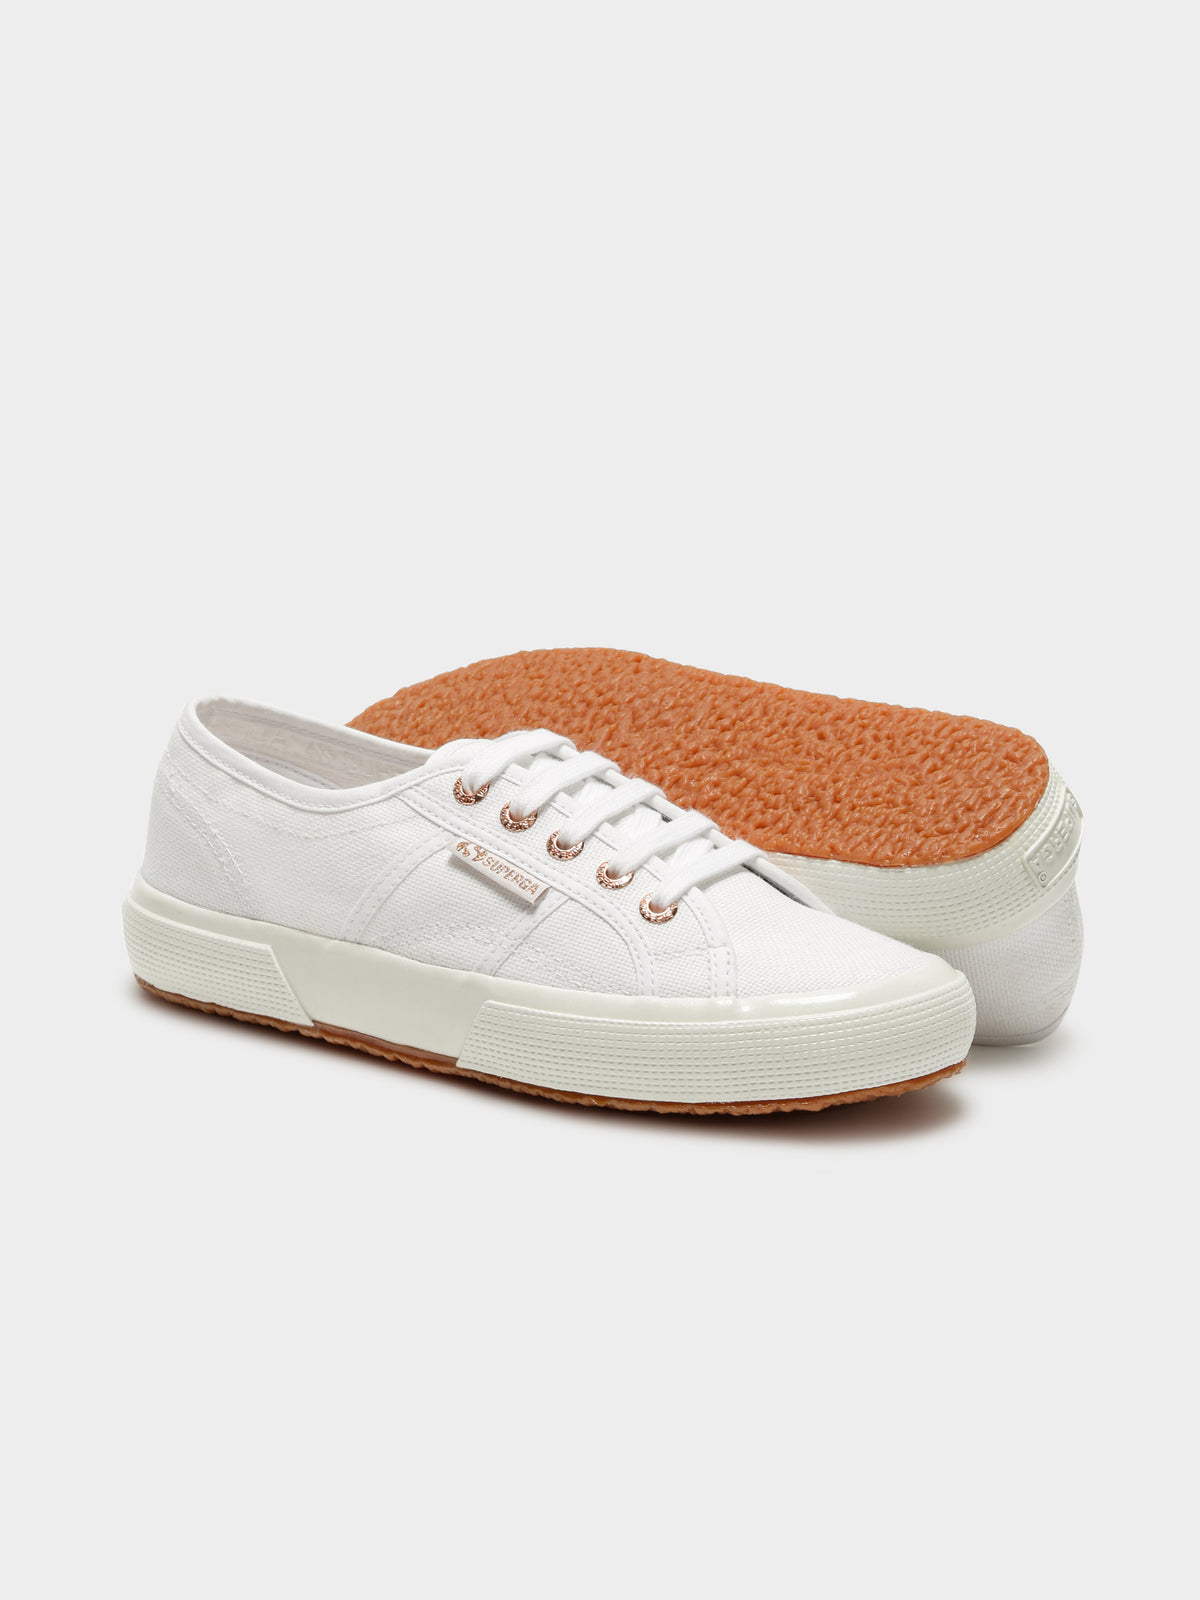 Womens 2750 Canvas Sneakers in Rose Gold